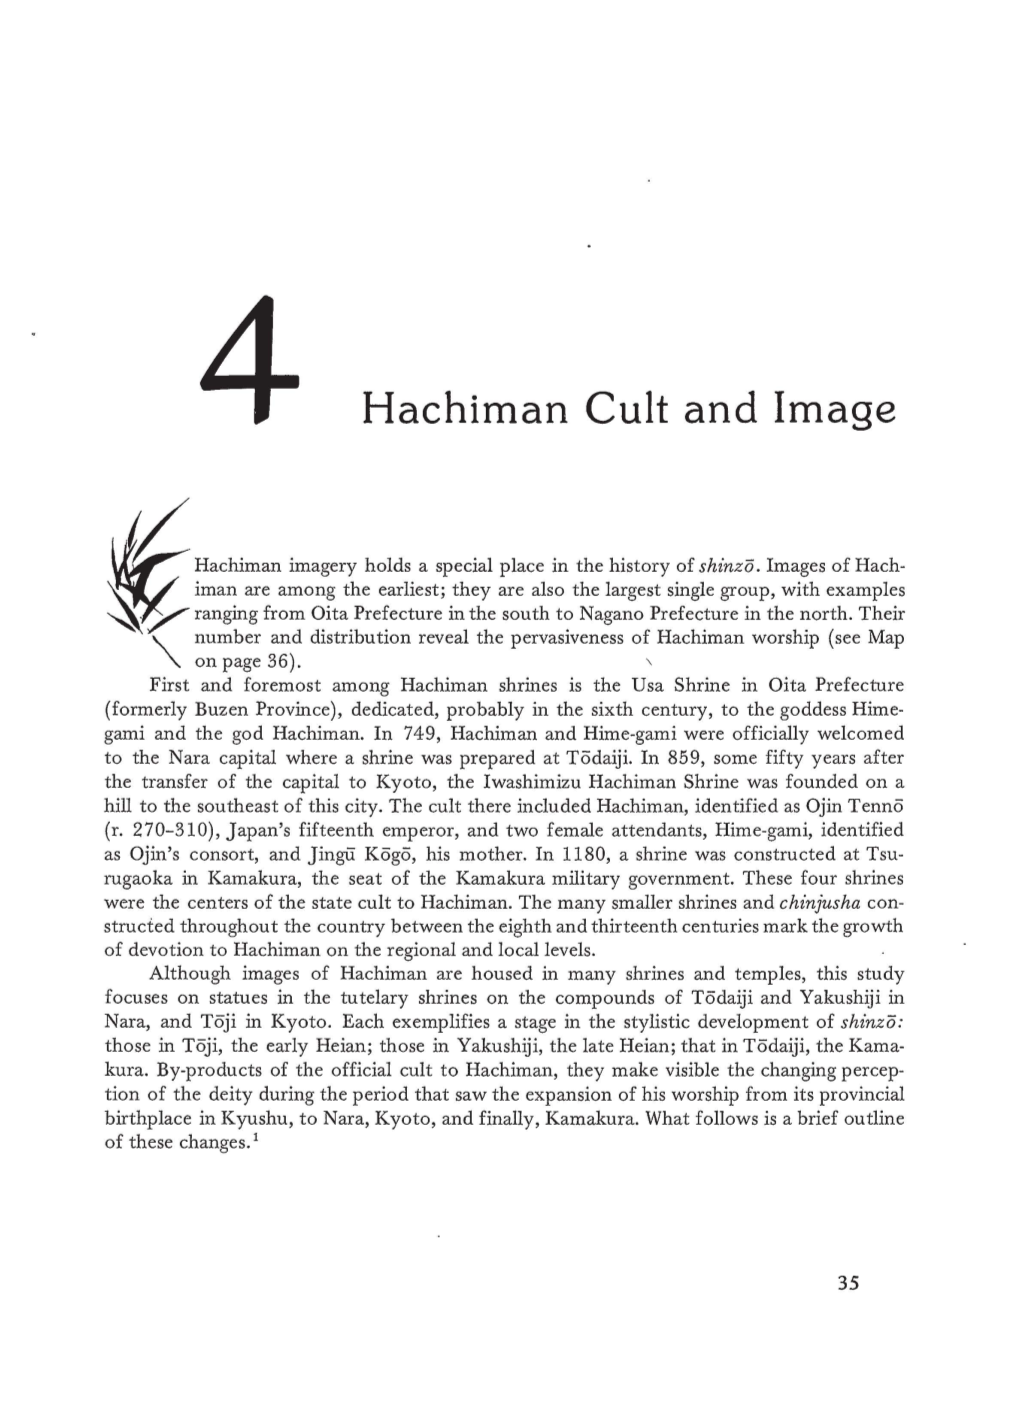 Hachiman Cult and Image